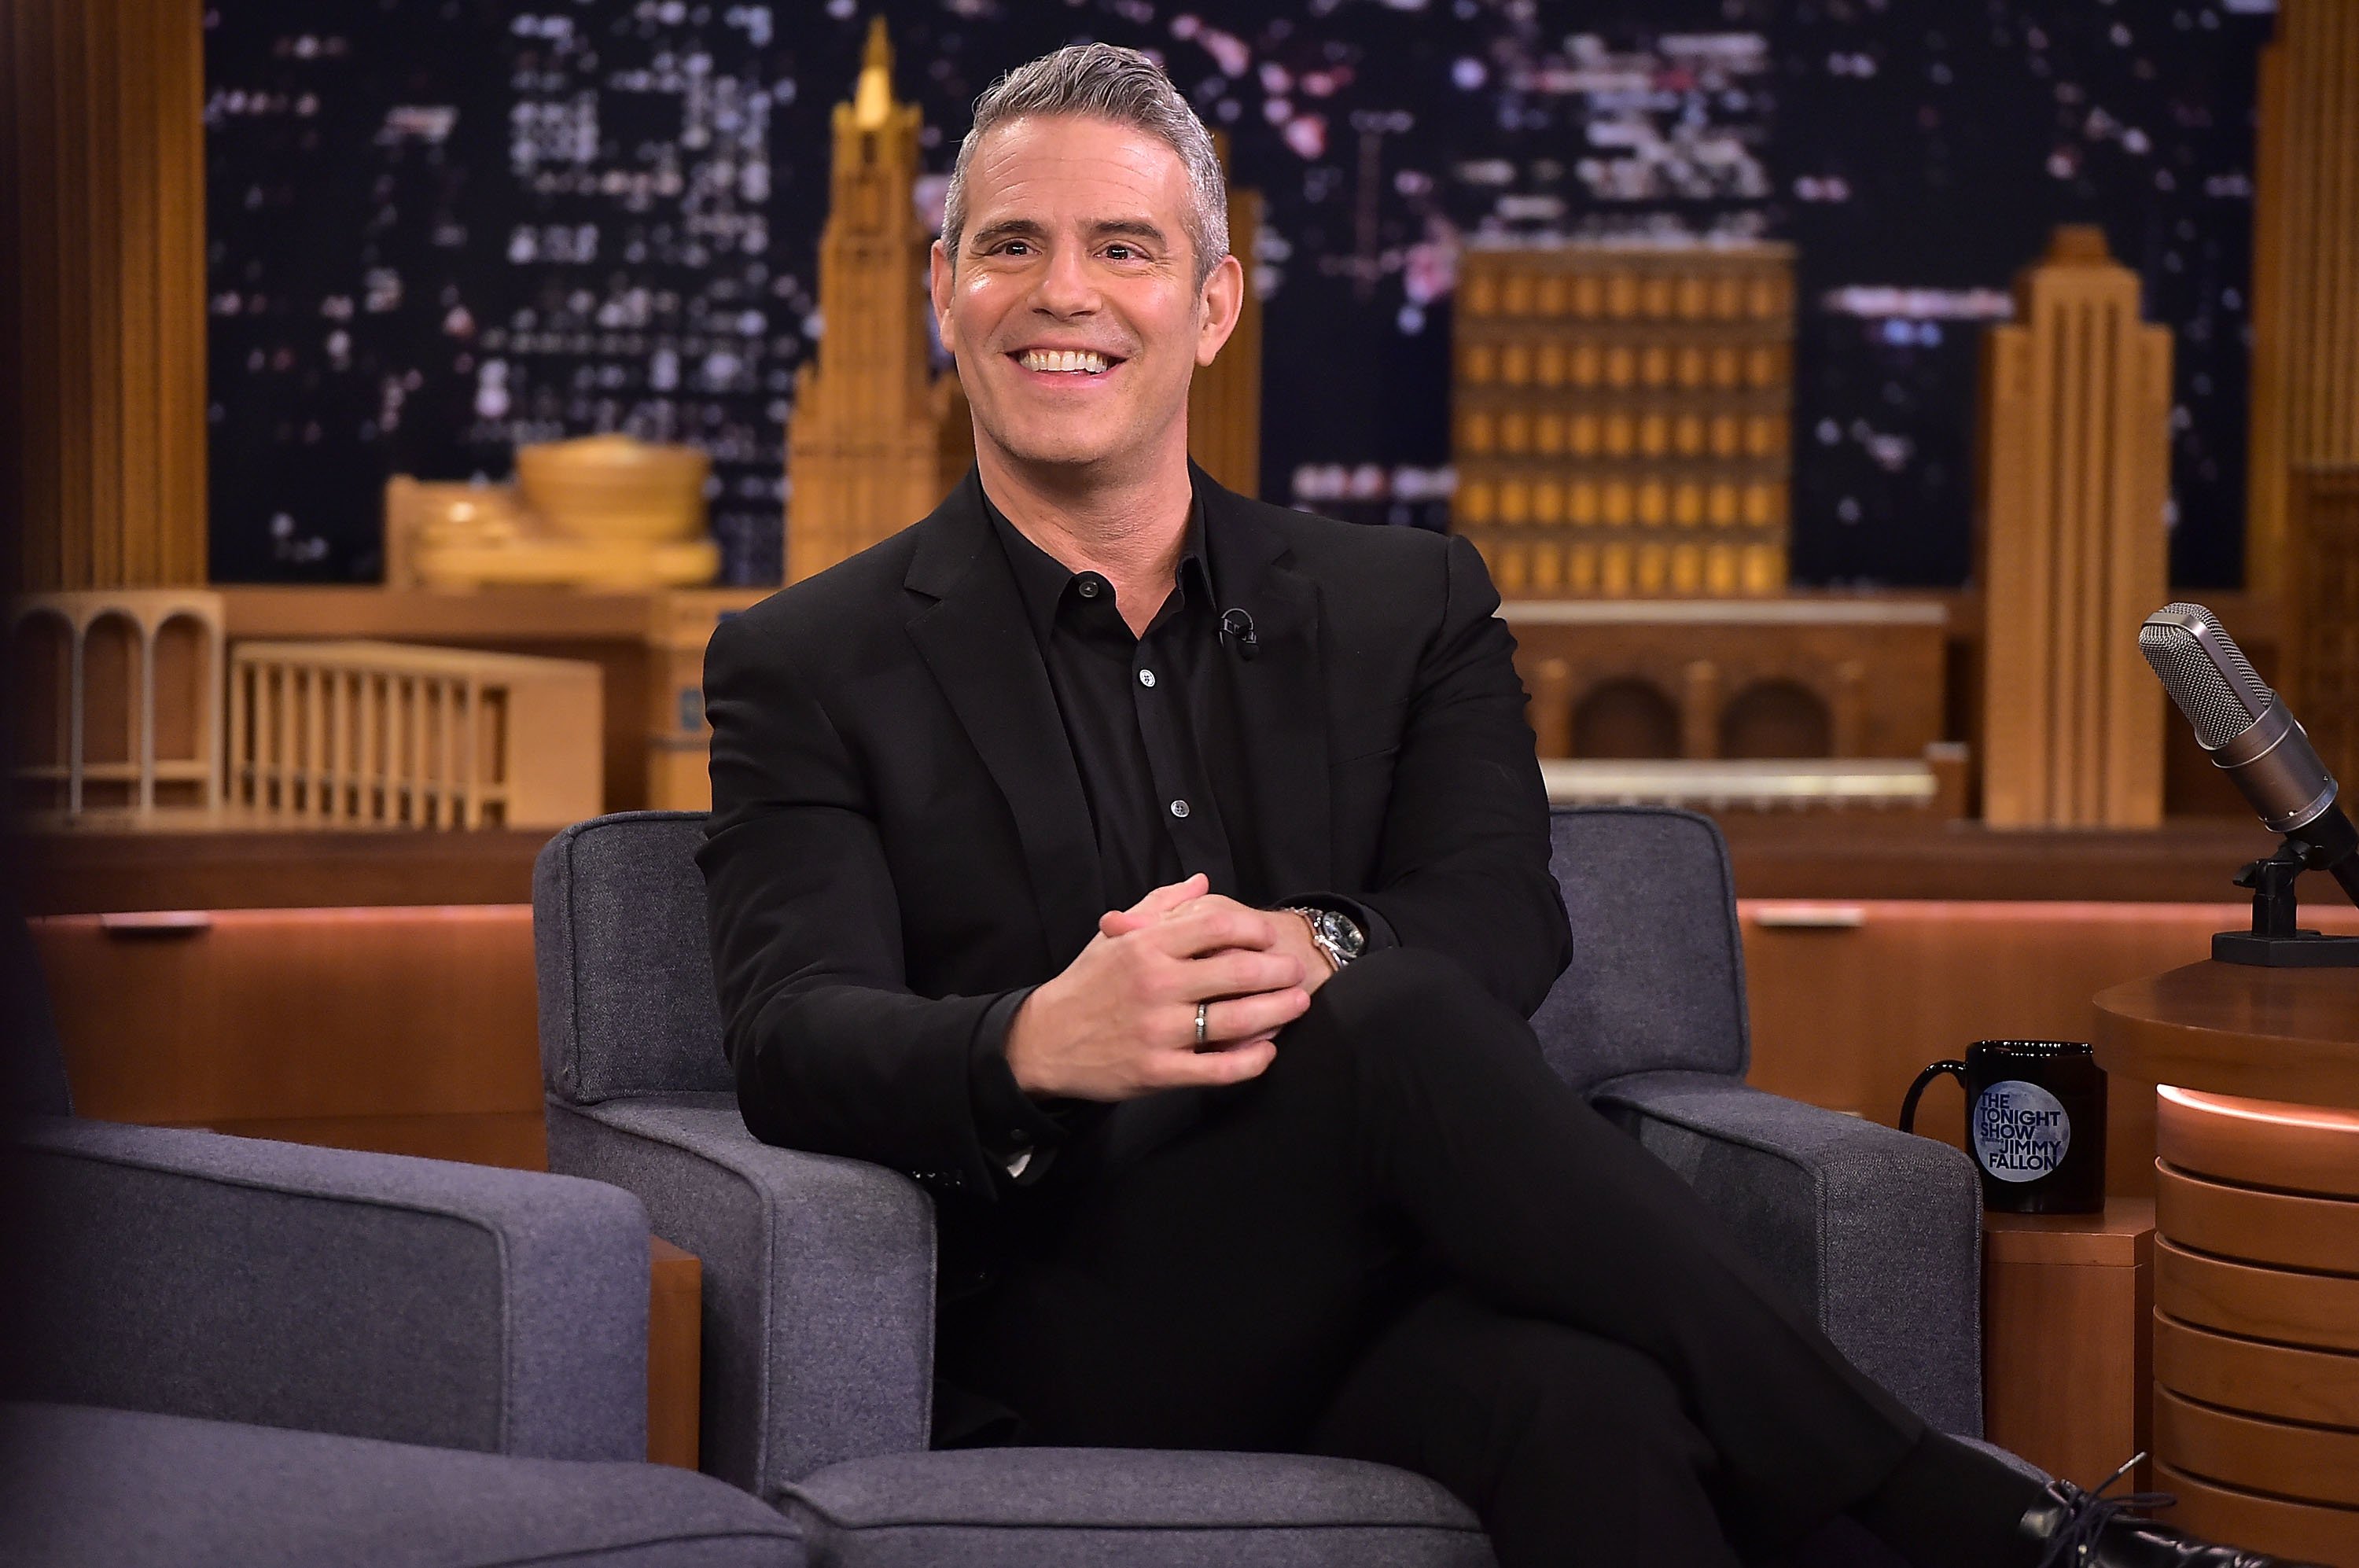 Andy Cohen visits "The Tonight Show Starring Jimmy Fallon" on December 5, 2018 in New York City. | Photo: GettyImages